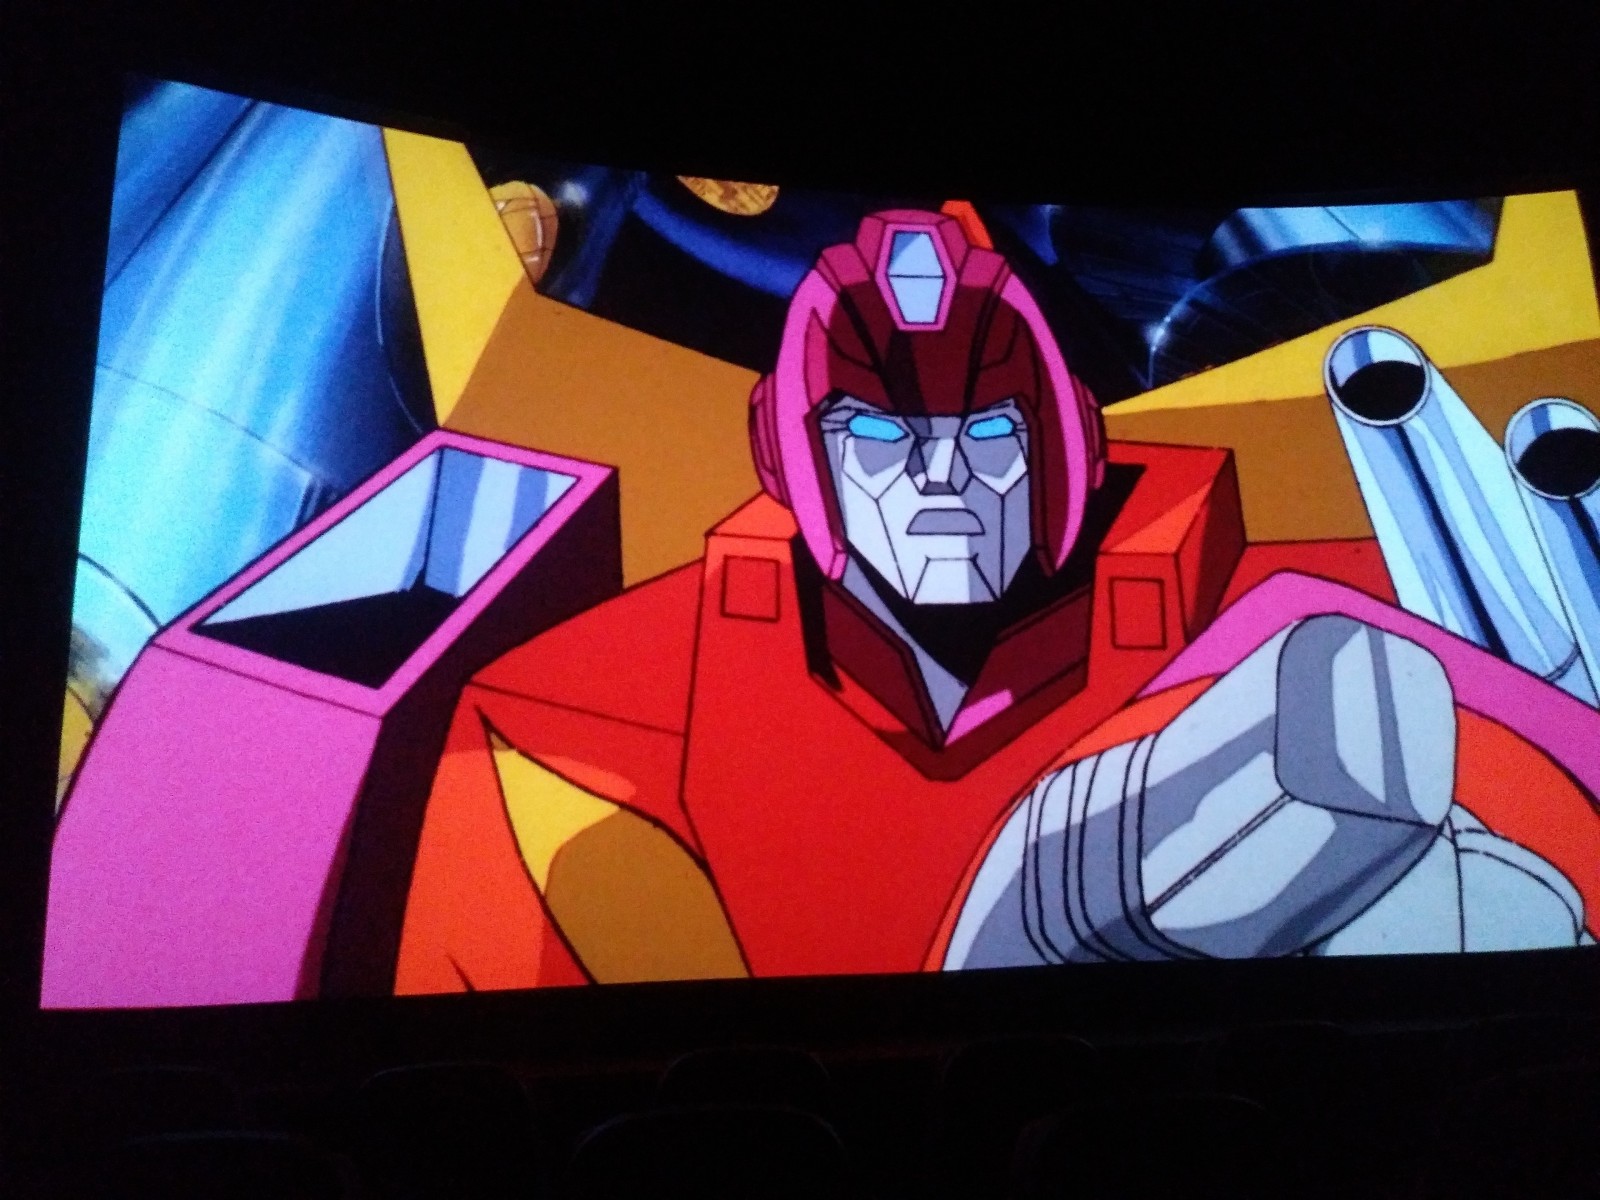 Transformers News: Review of 2018 Big Screen Showing of 1986 Transformers Film with Bumblebee Movie Sneak Peek